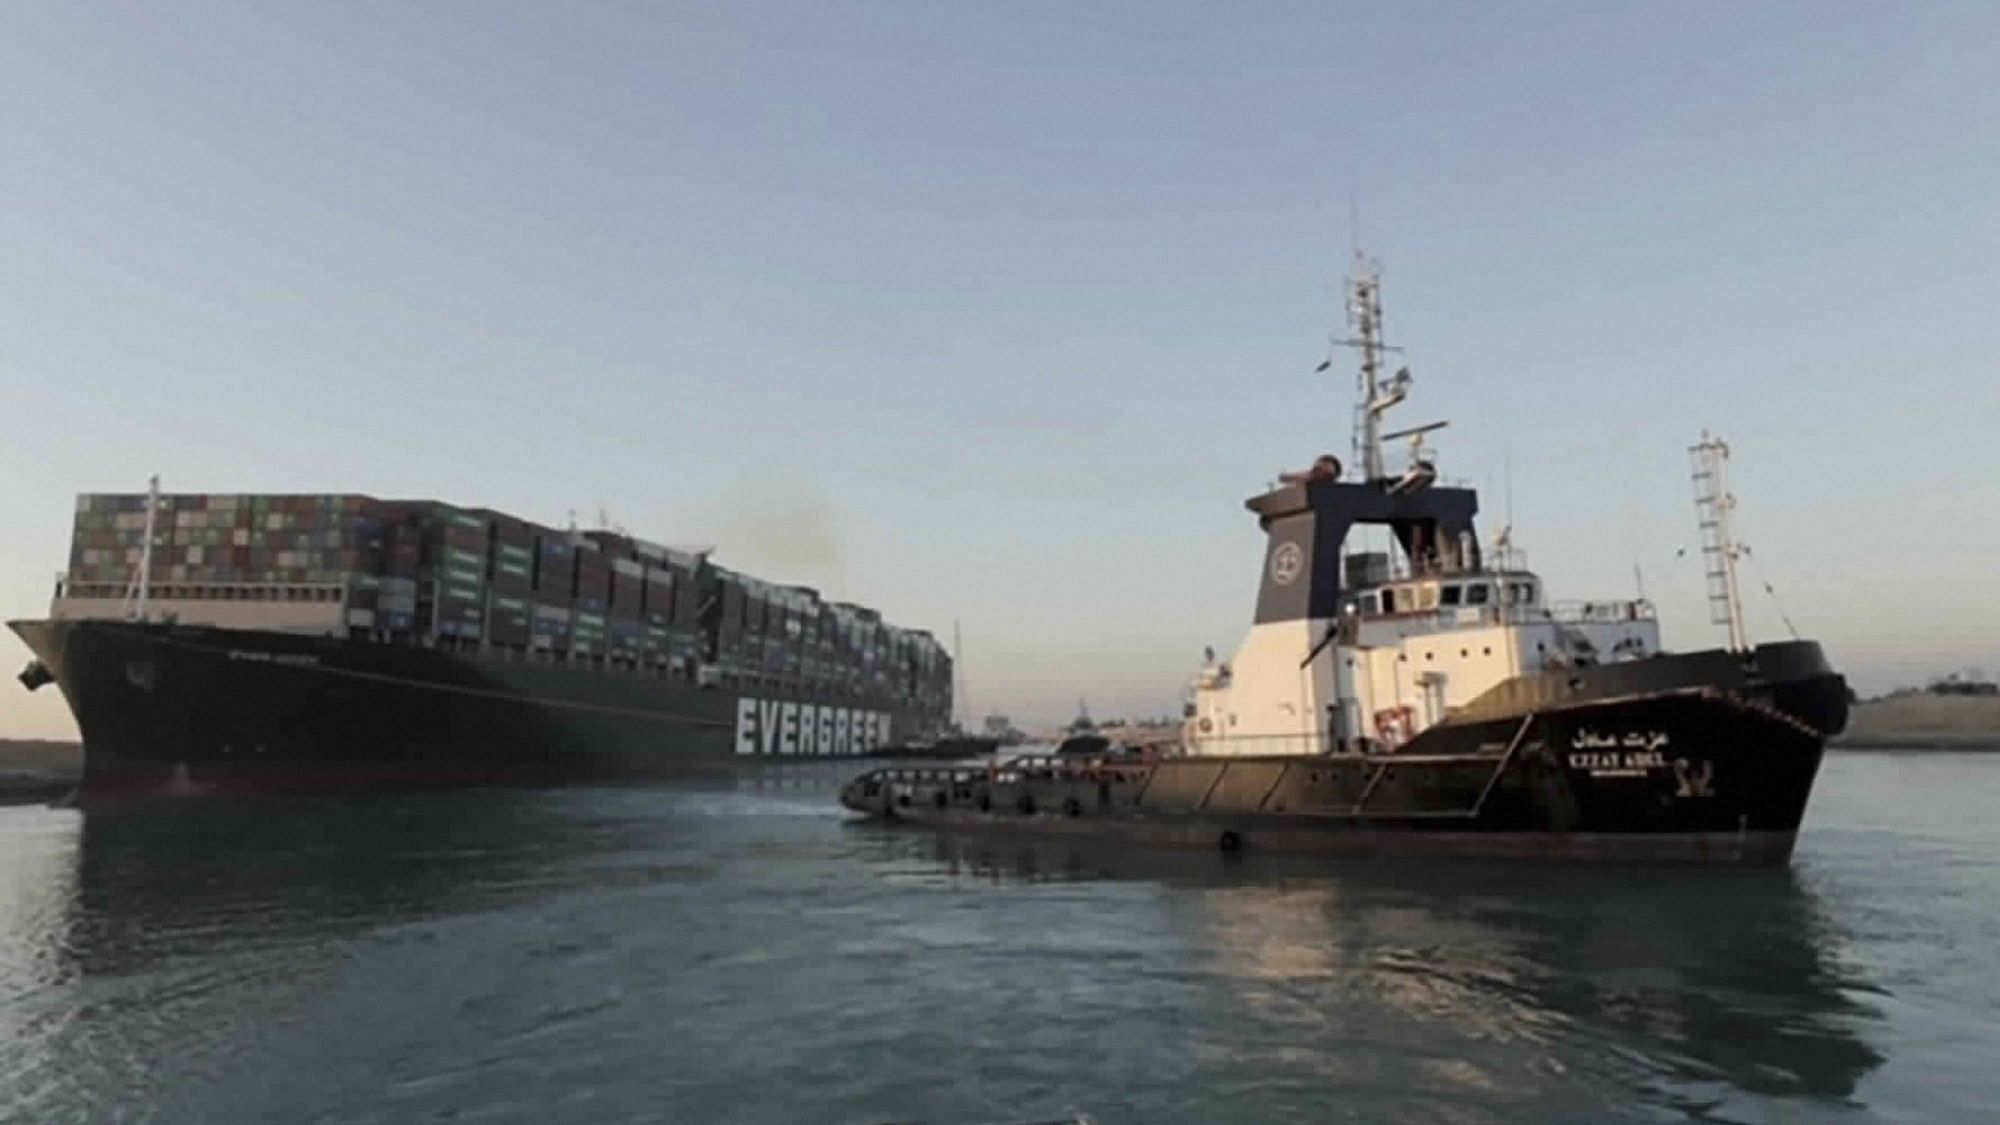 In the photo released by Suez Canal Authority, the Ever Given, a Panama-flagged cargo ship is pulled by one of the Suez Canal tugboats, in the Suez Canal, Egypt on 29 March.